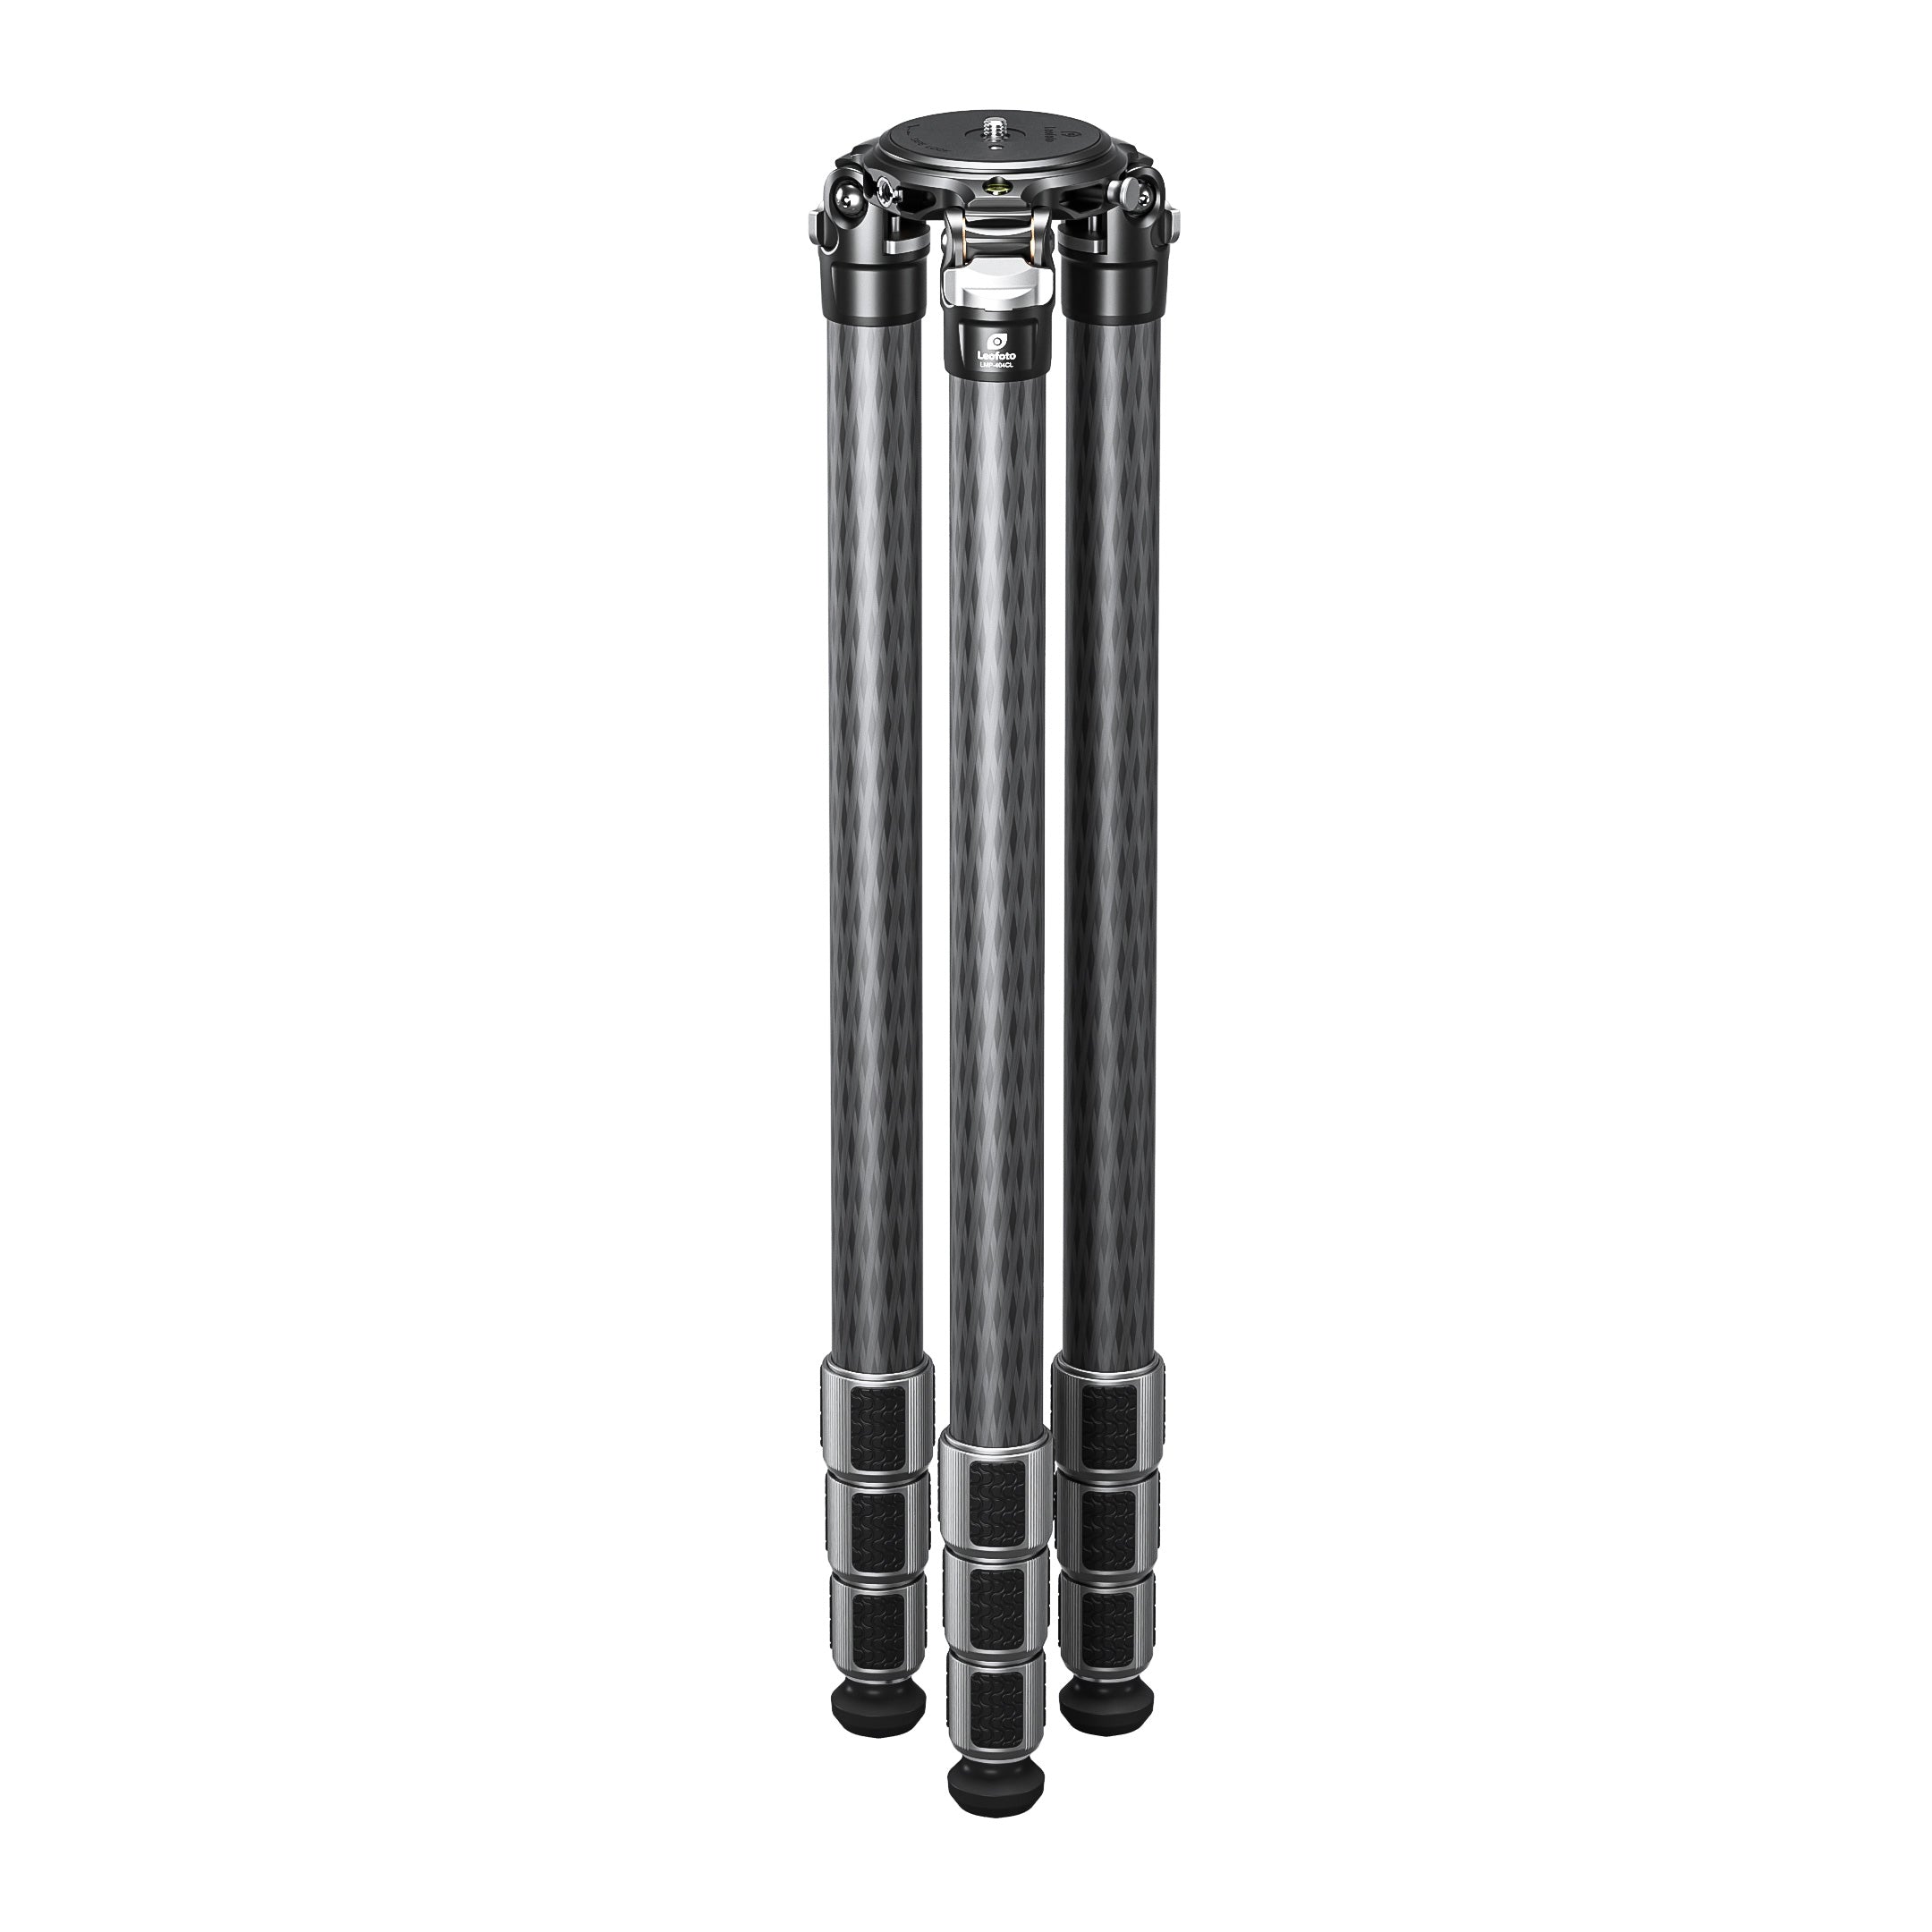 Leofoto LMP-324CL(Long) Water-Resistant Tripod with 75mm Video Bowl and Bag | Anti-Corrosion with Titanium Foot Spike